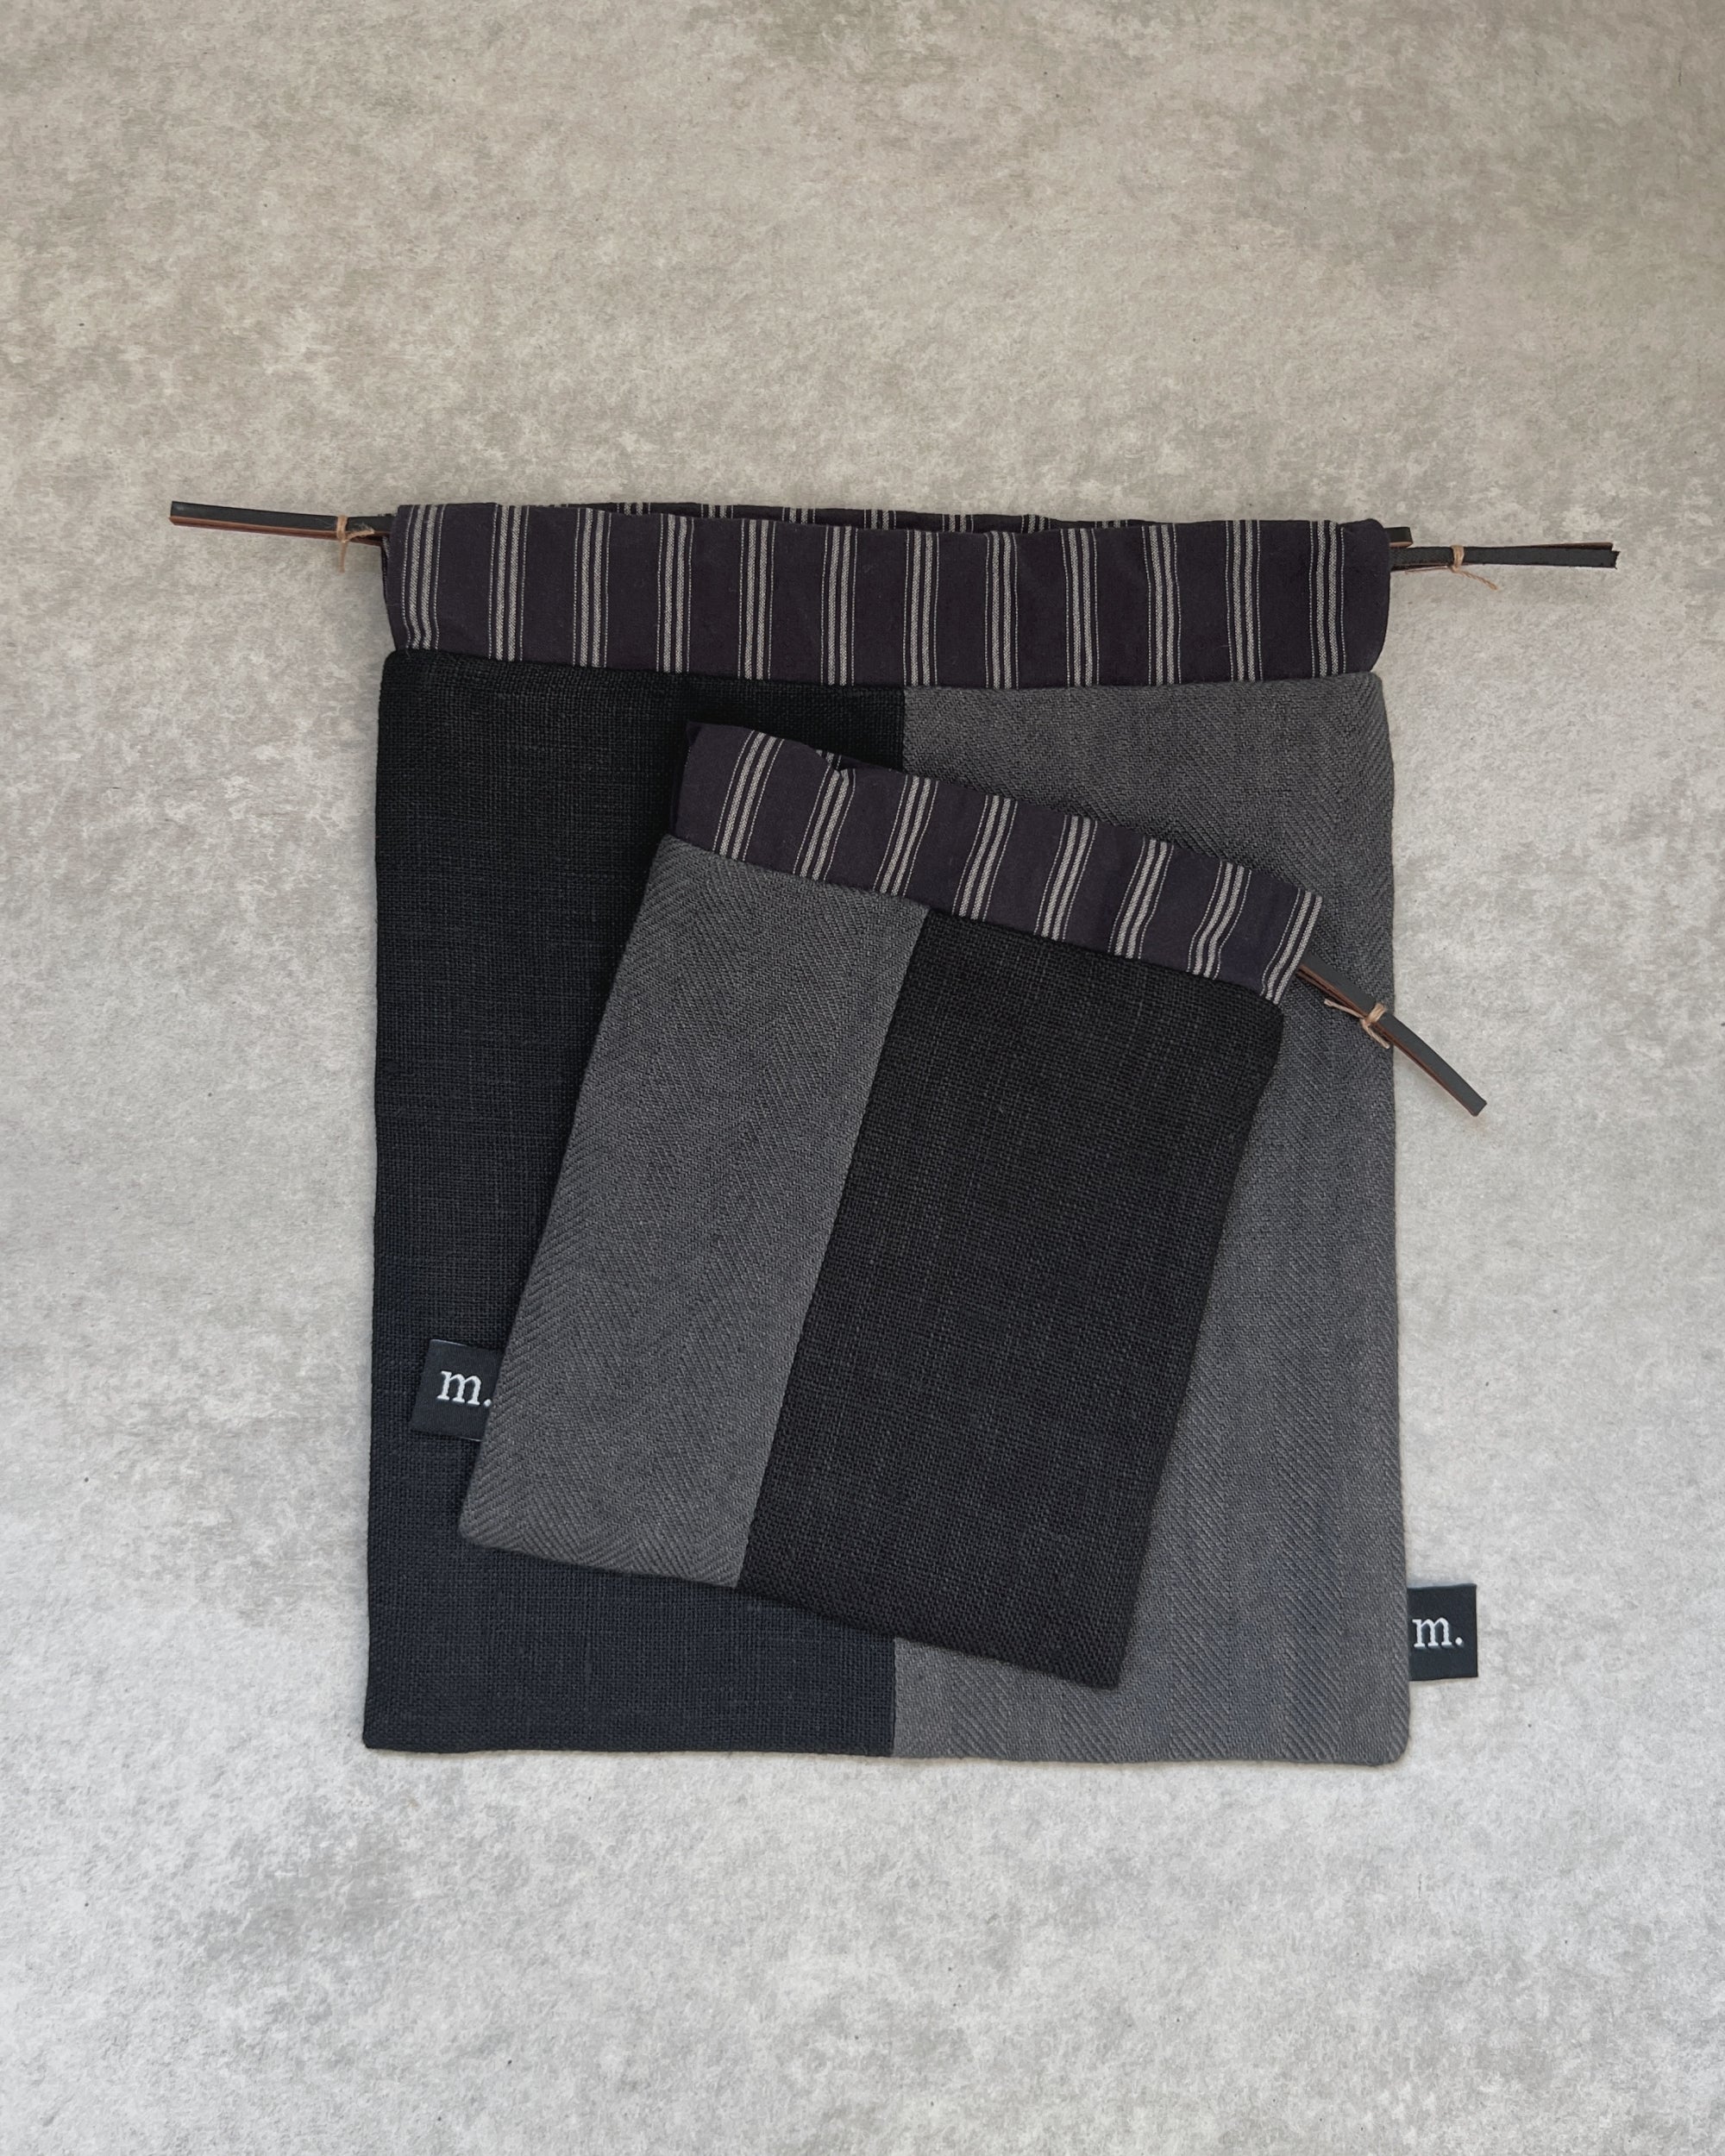 Japanese linen and cotton kit bag, hand made in hobart